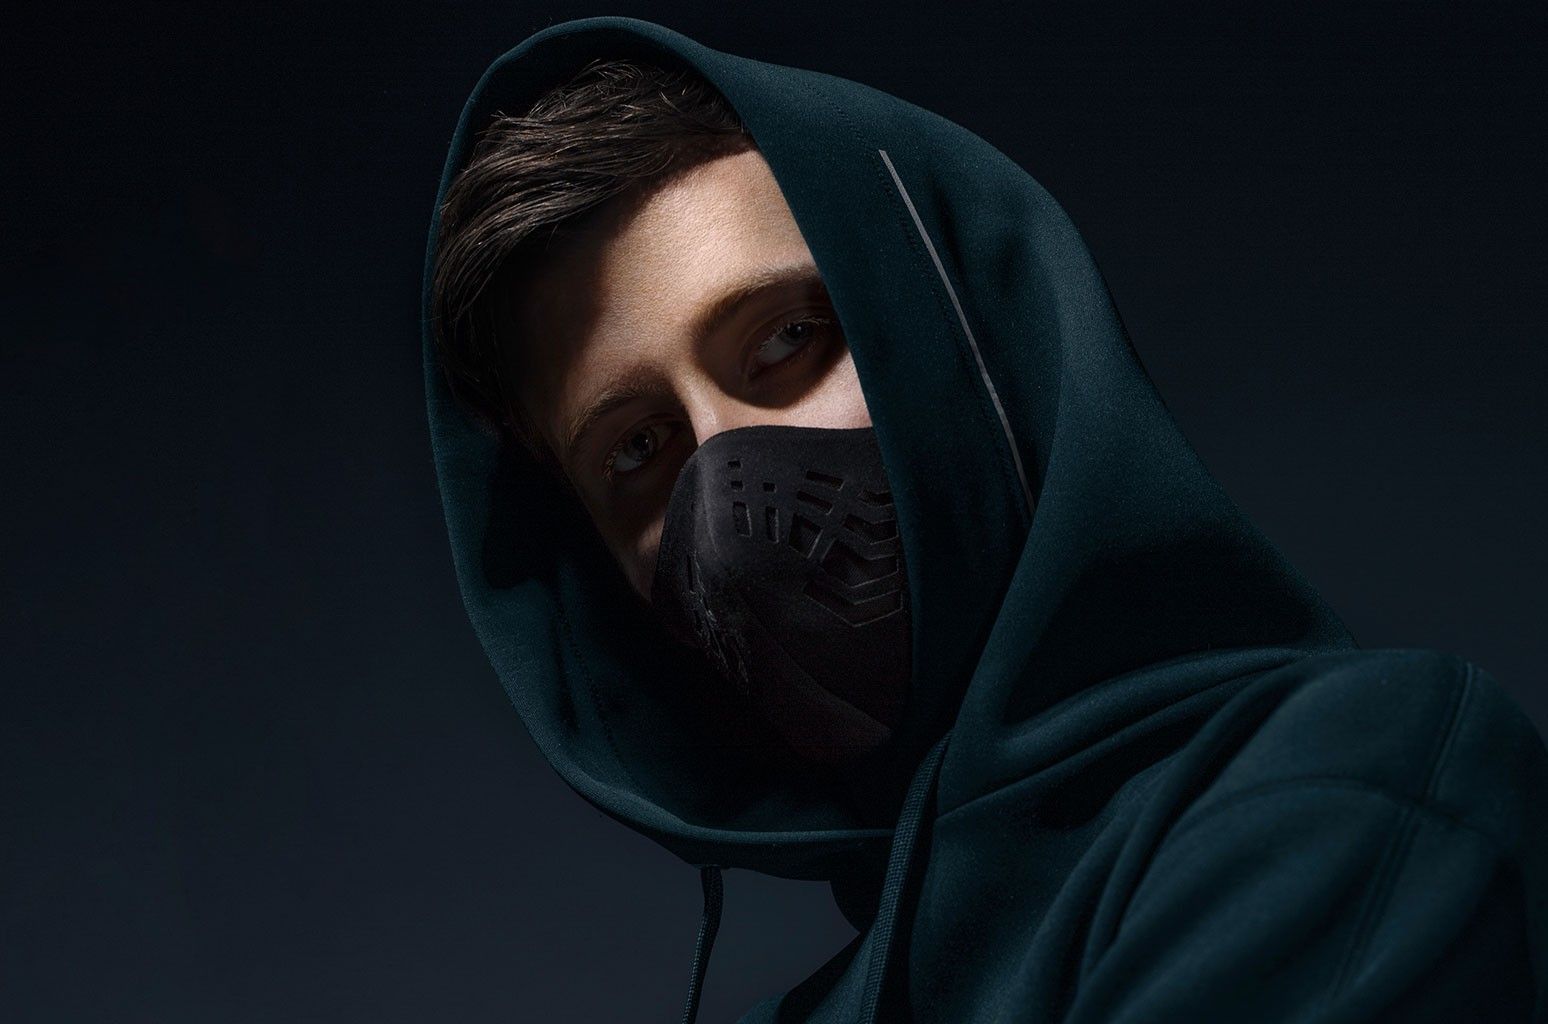 Alan Walker Wants to Unite the World With His Remix of 'Time' By the 'Genius' Hans Zimmer: Exclusive